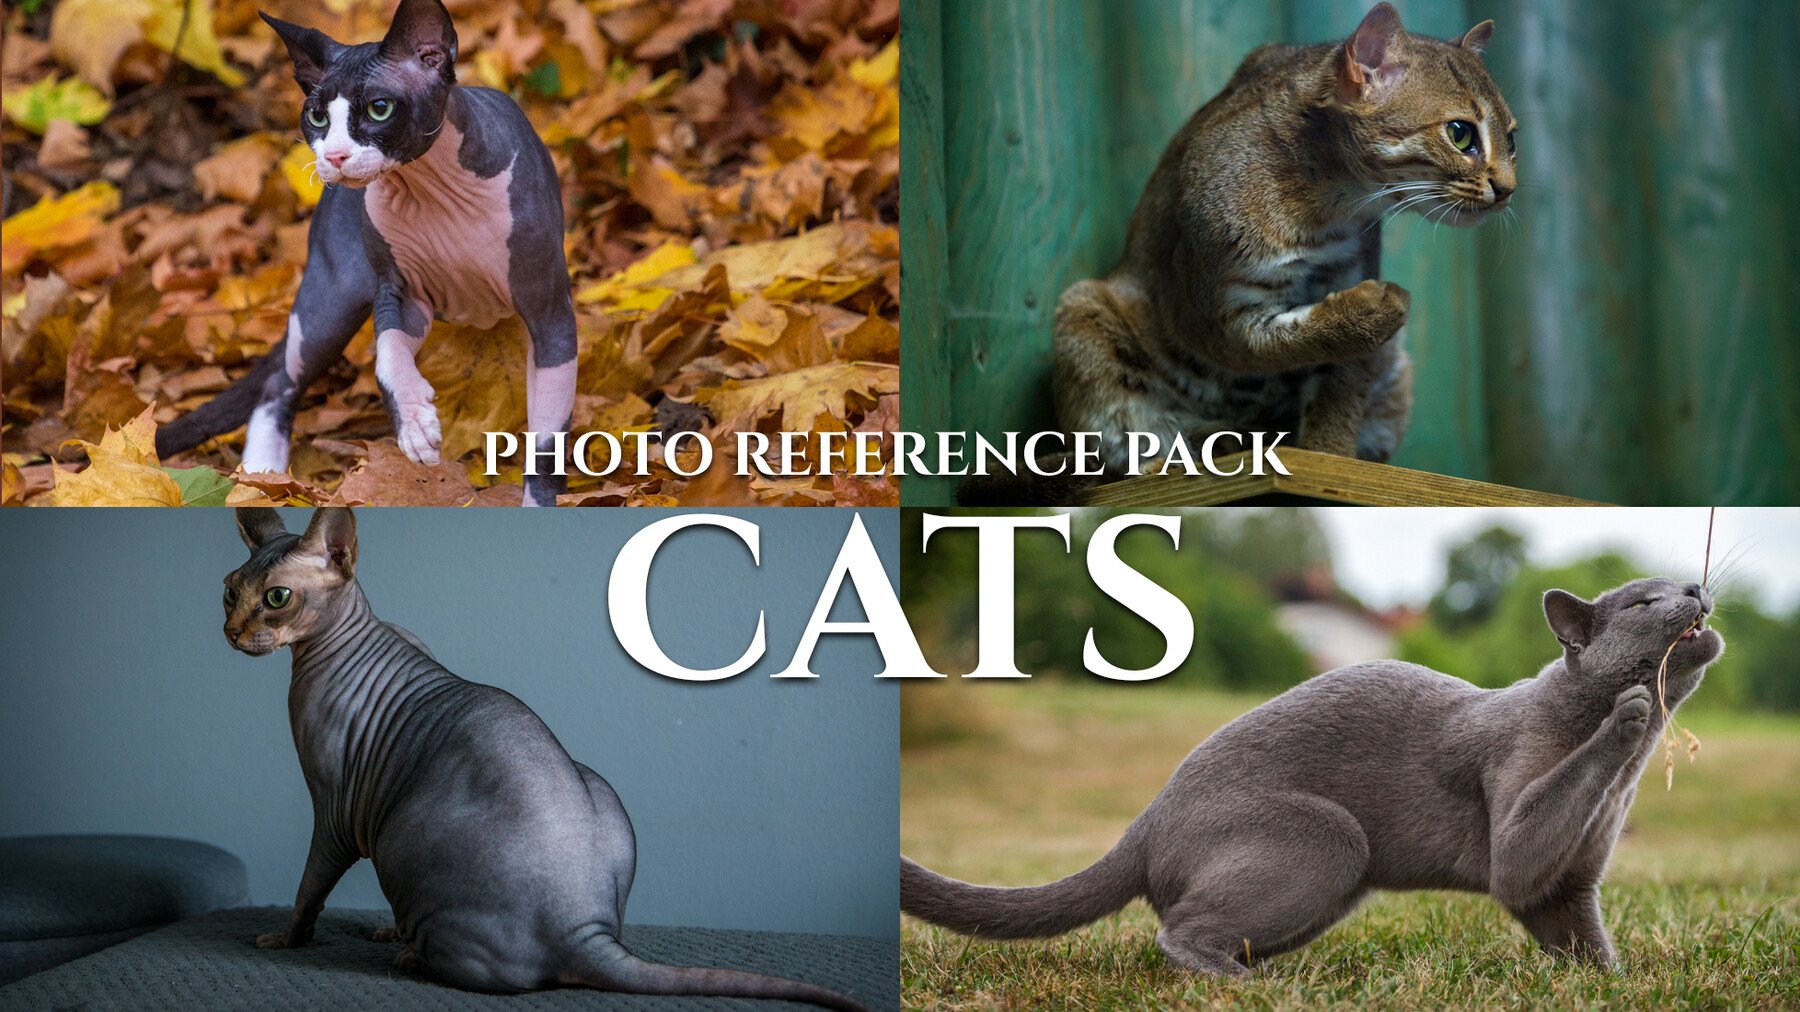 Cats - Photo Reference Pack For Artists 421 JPEGs